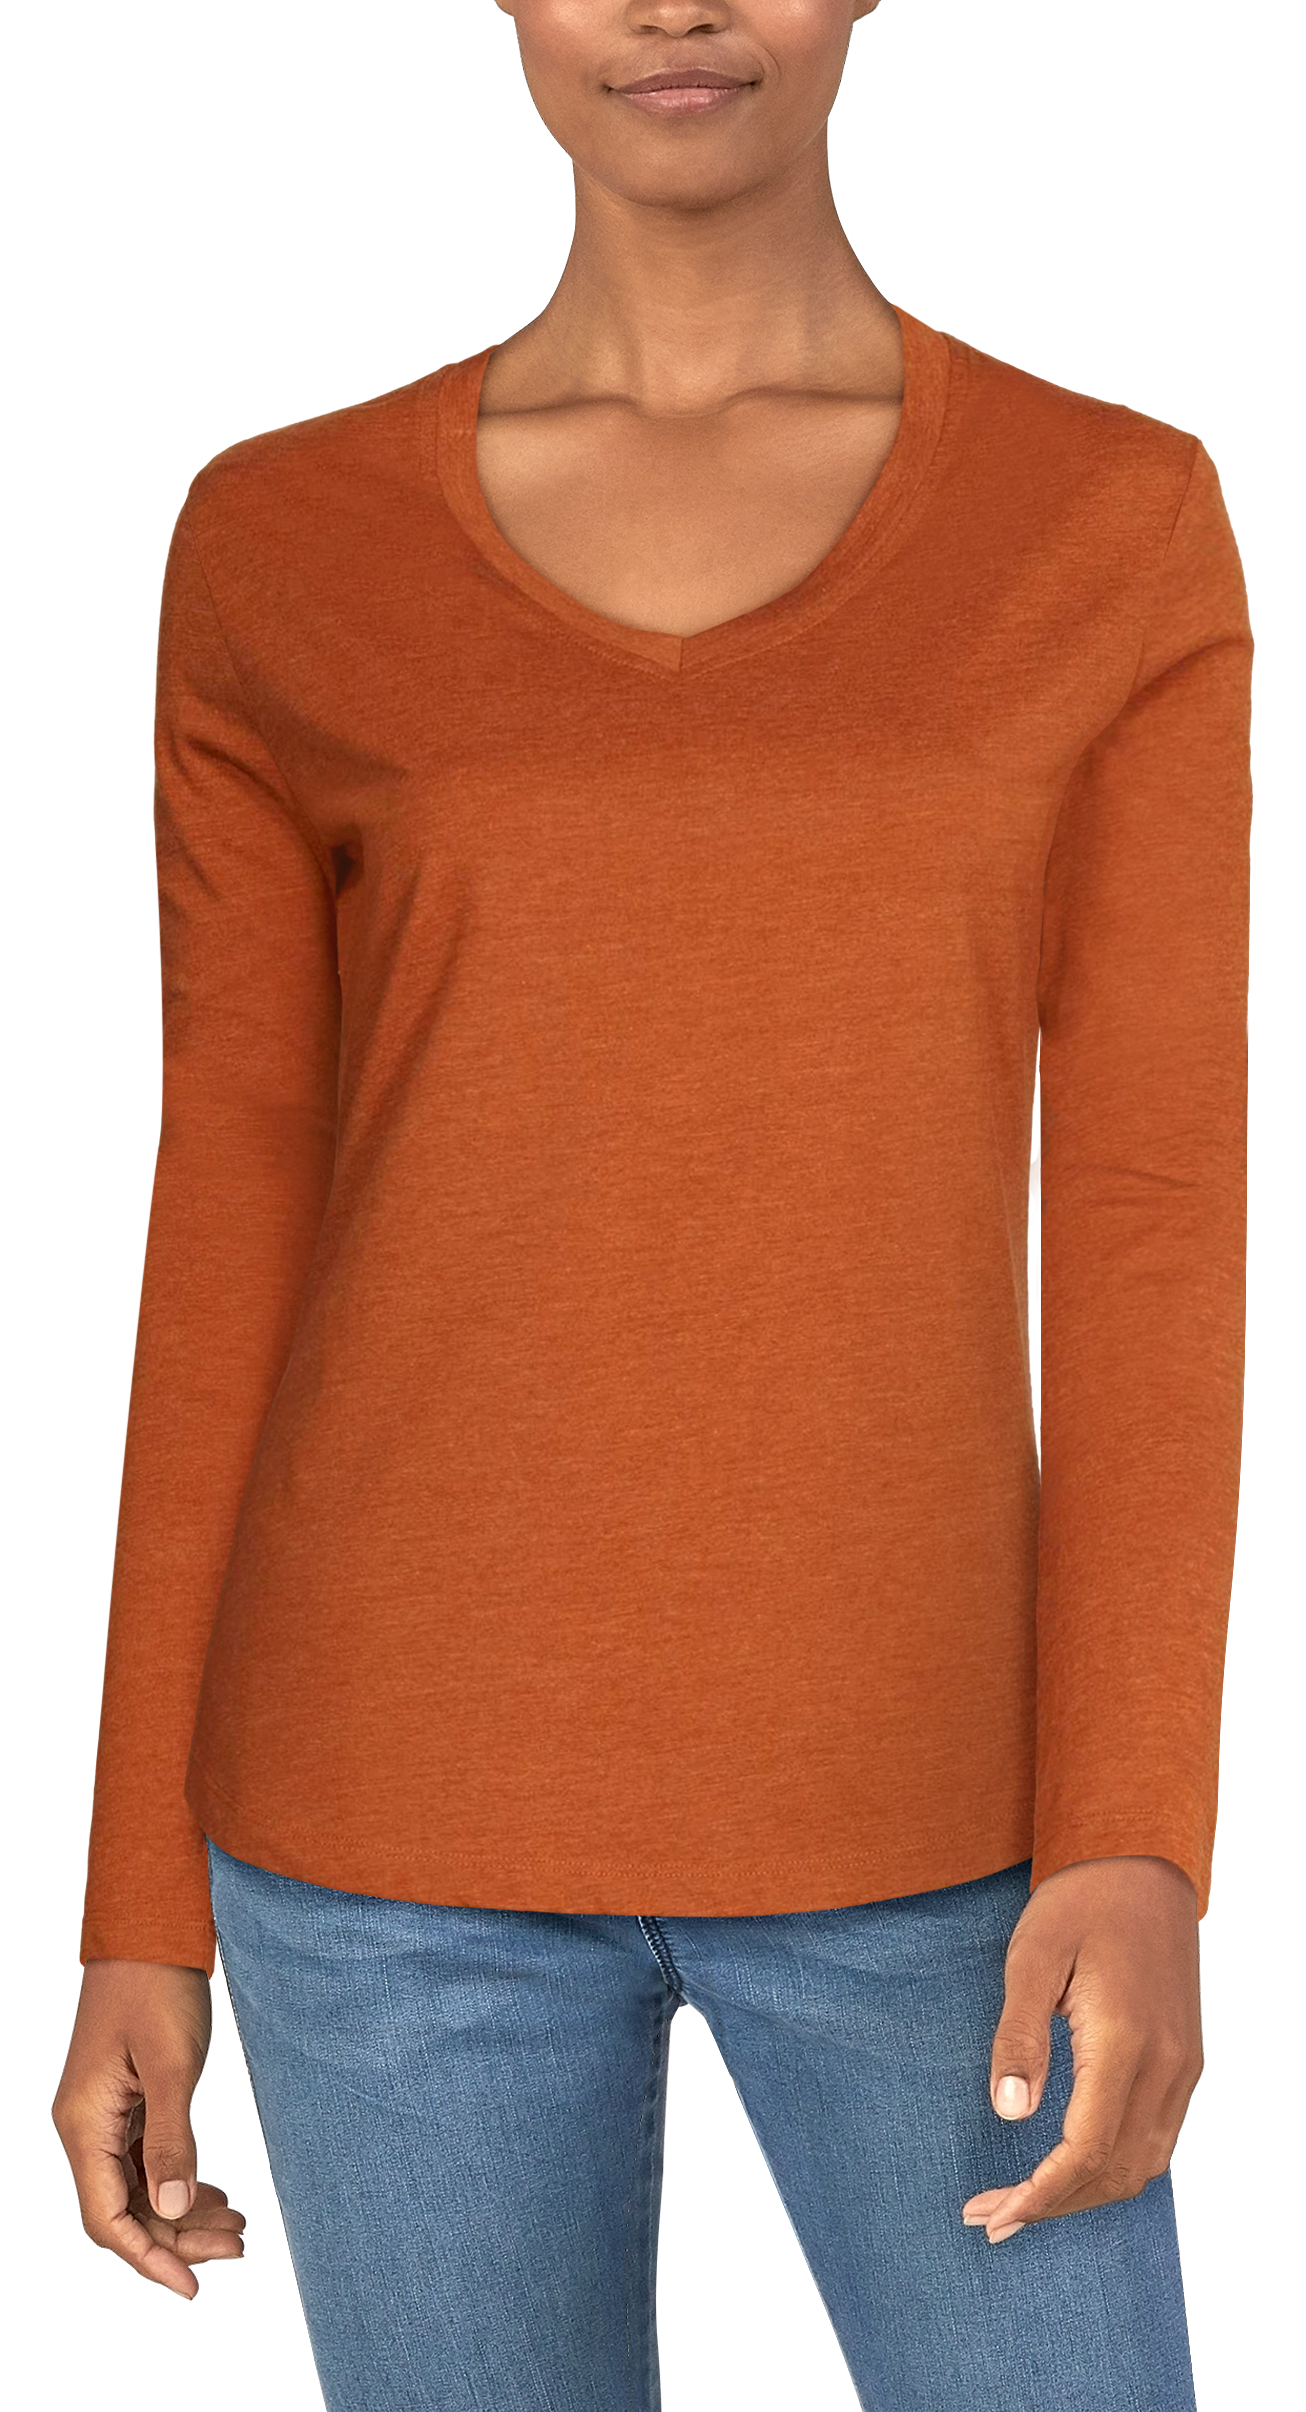 Natural Reflections Essential Long-Sleeve V-Neck T-Shirt for Ladies - Caramel Cafe - M